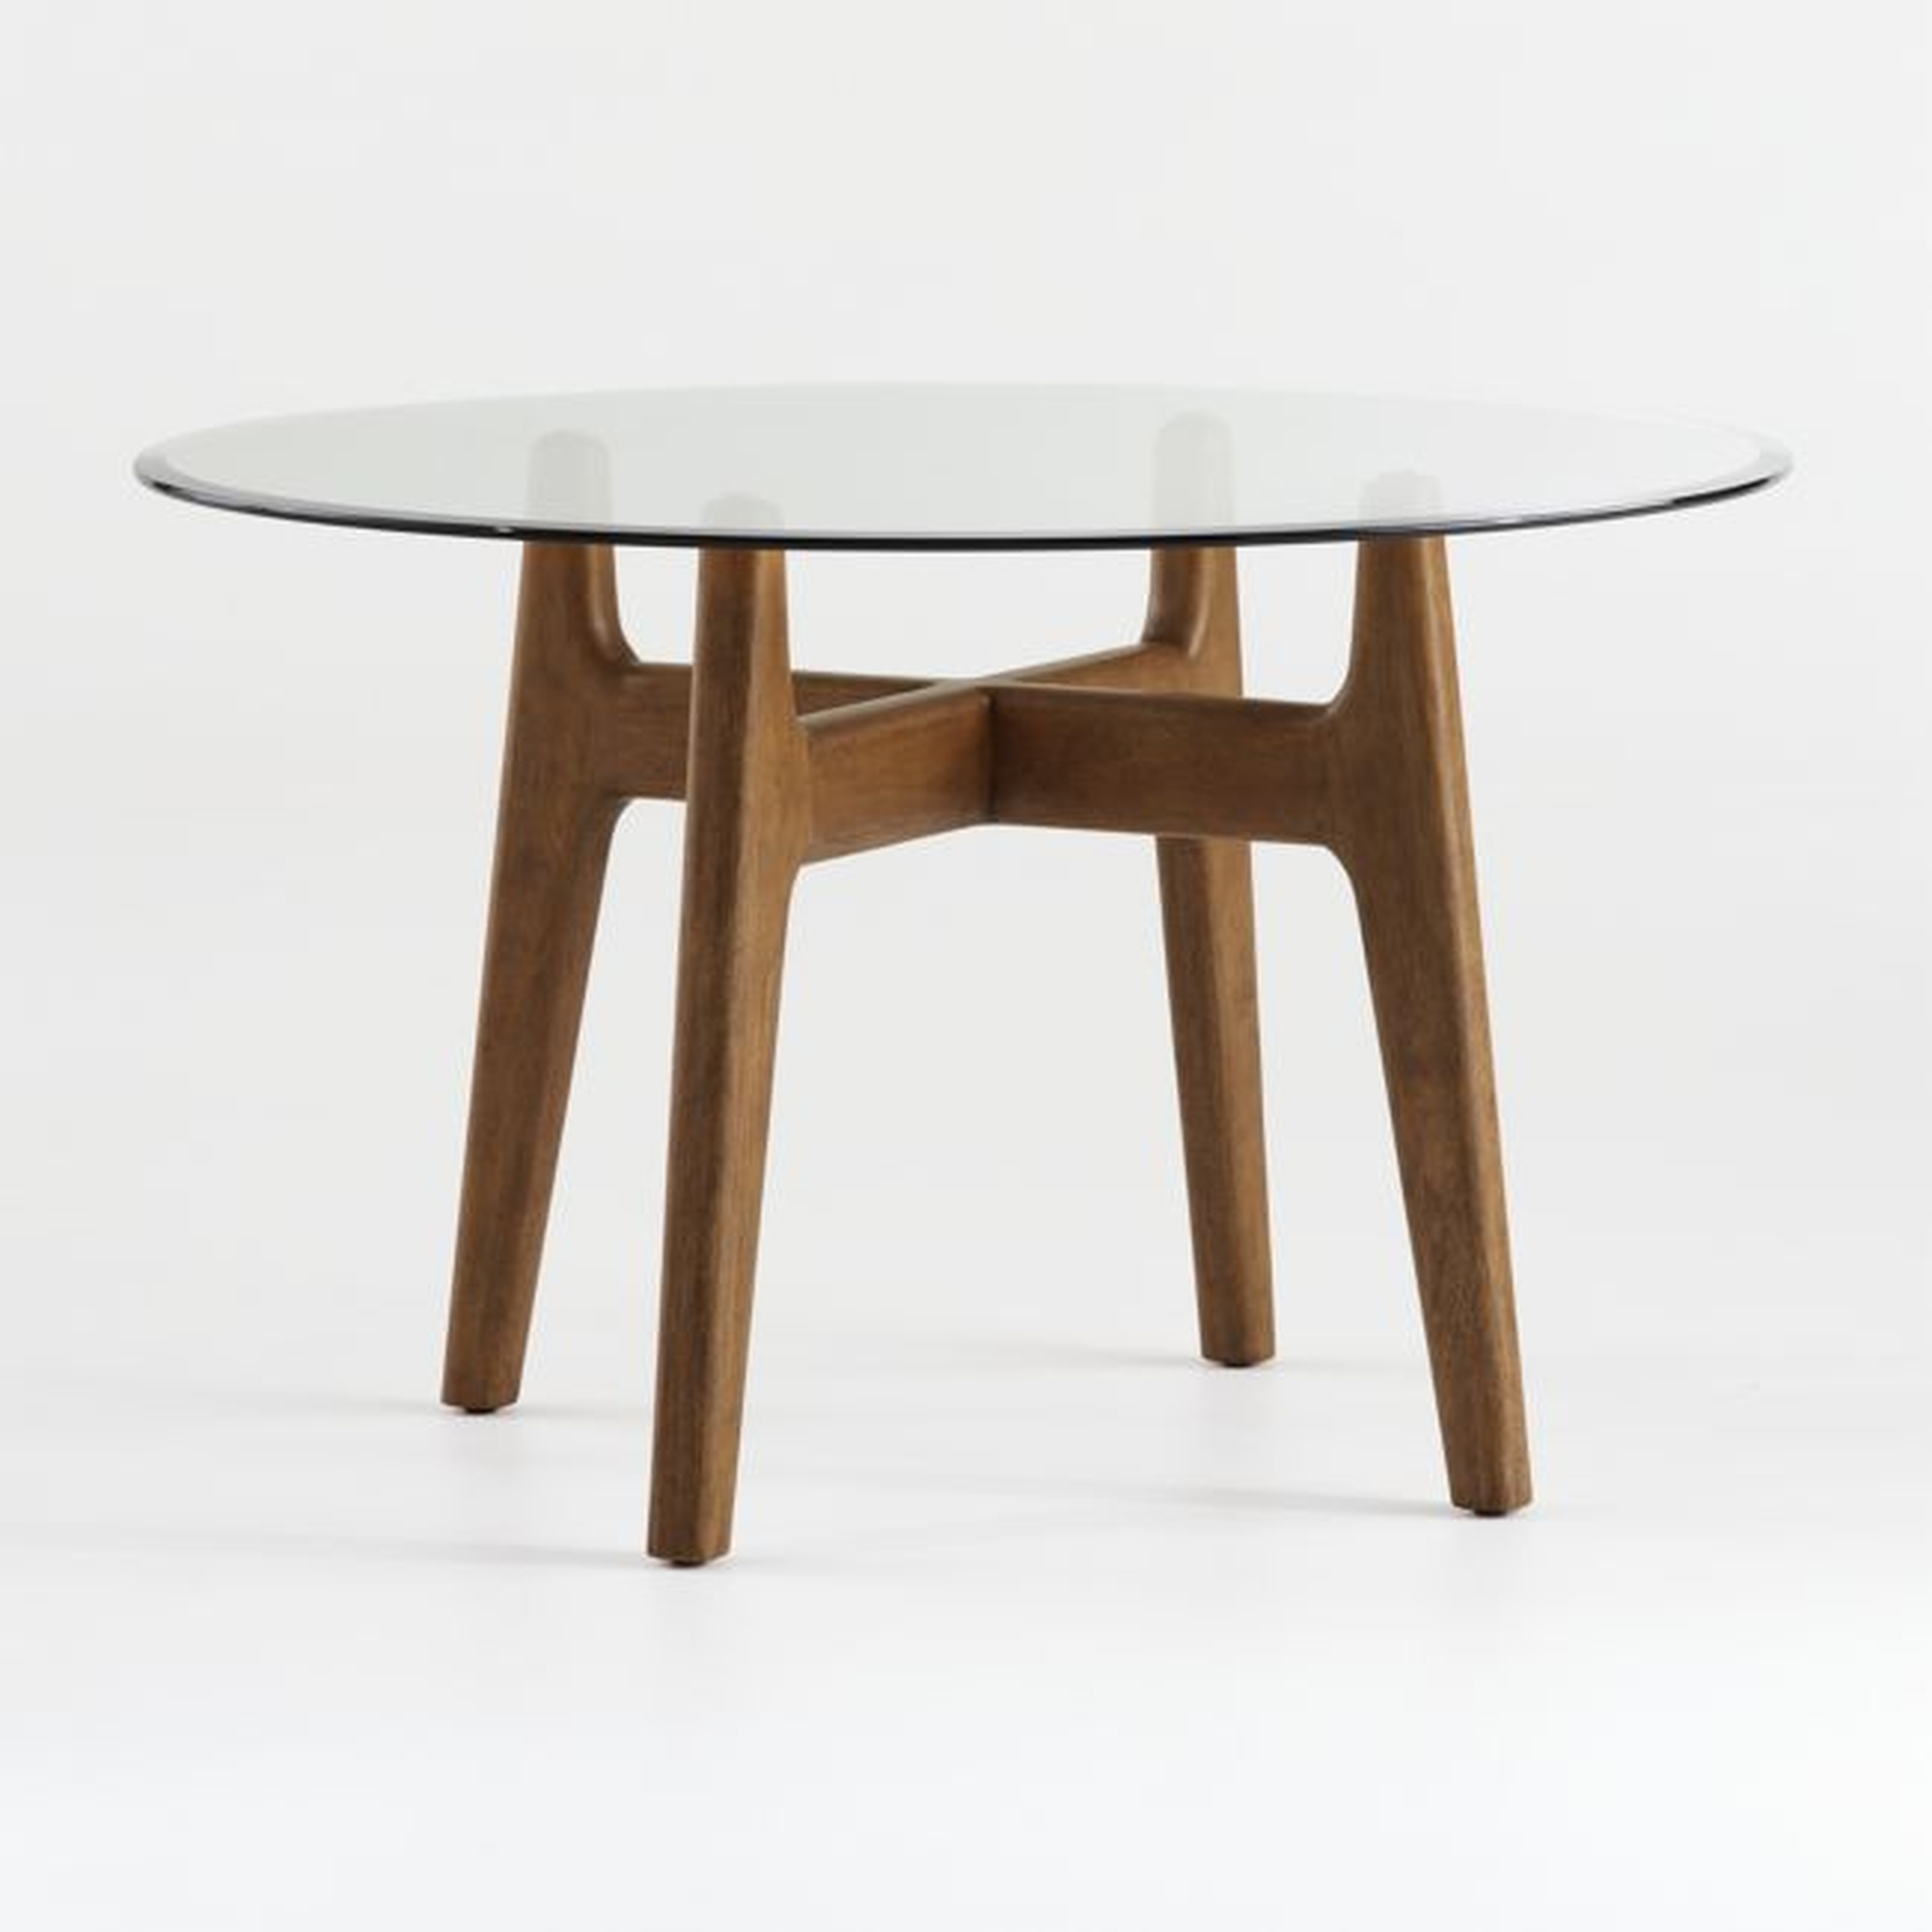 Tate 48" Round Dining Table with Glass Top and Walnut Base - Crate and Barrel